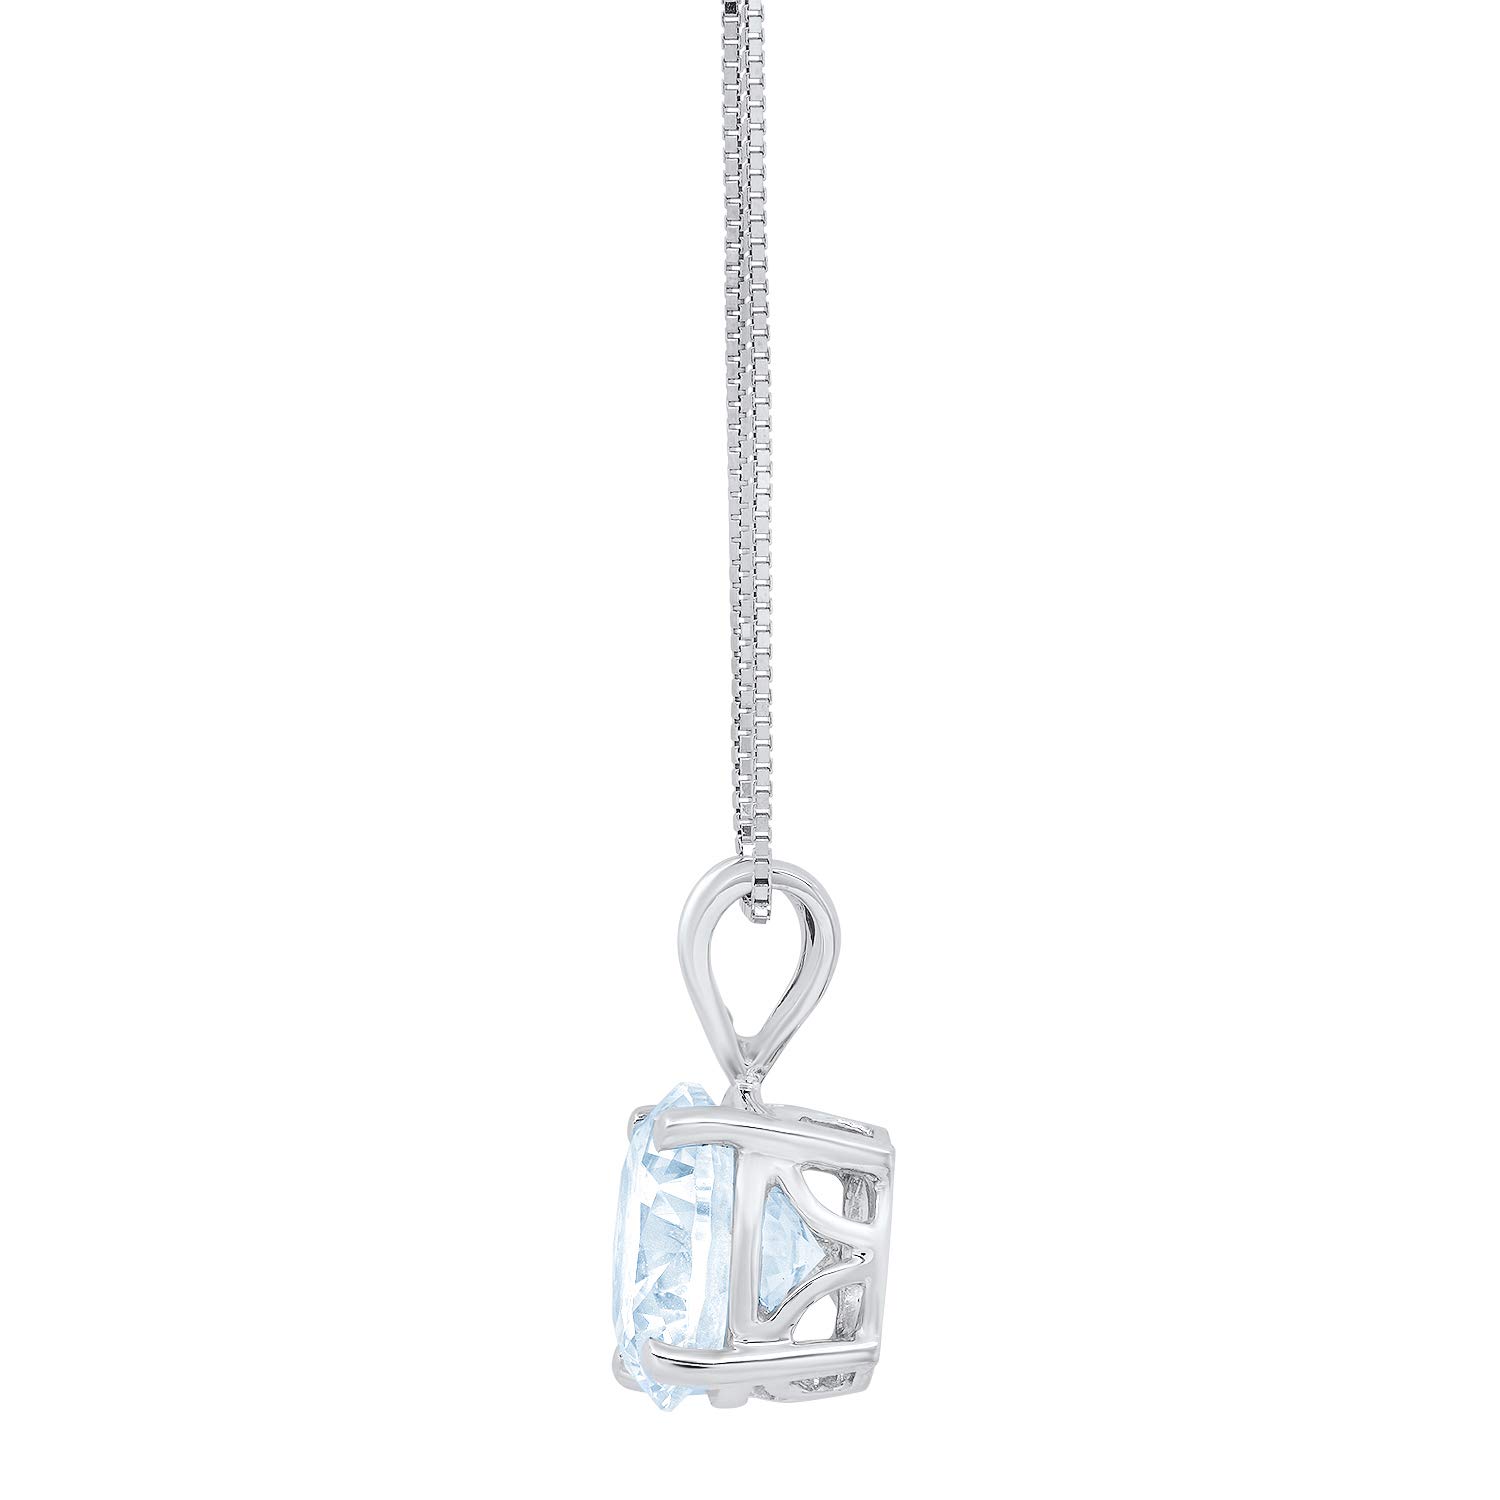 Clara Pucci 0.50 ct Brilliant Round Cut Stunning Genuine Flawless Blue Simulated Diamond Gemstone Solitaire Pendant Necklace With 16